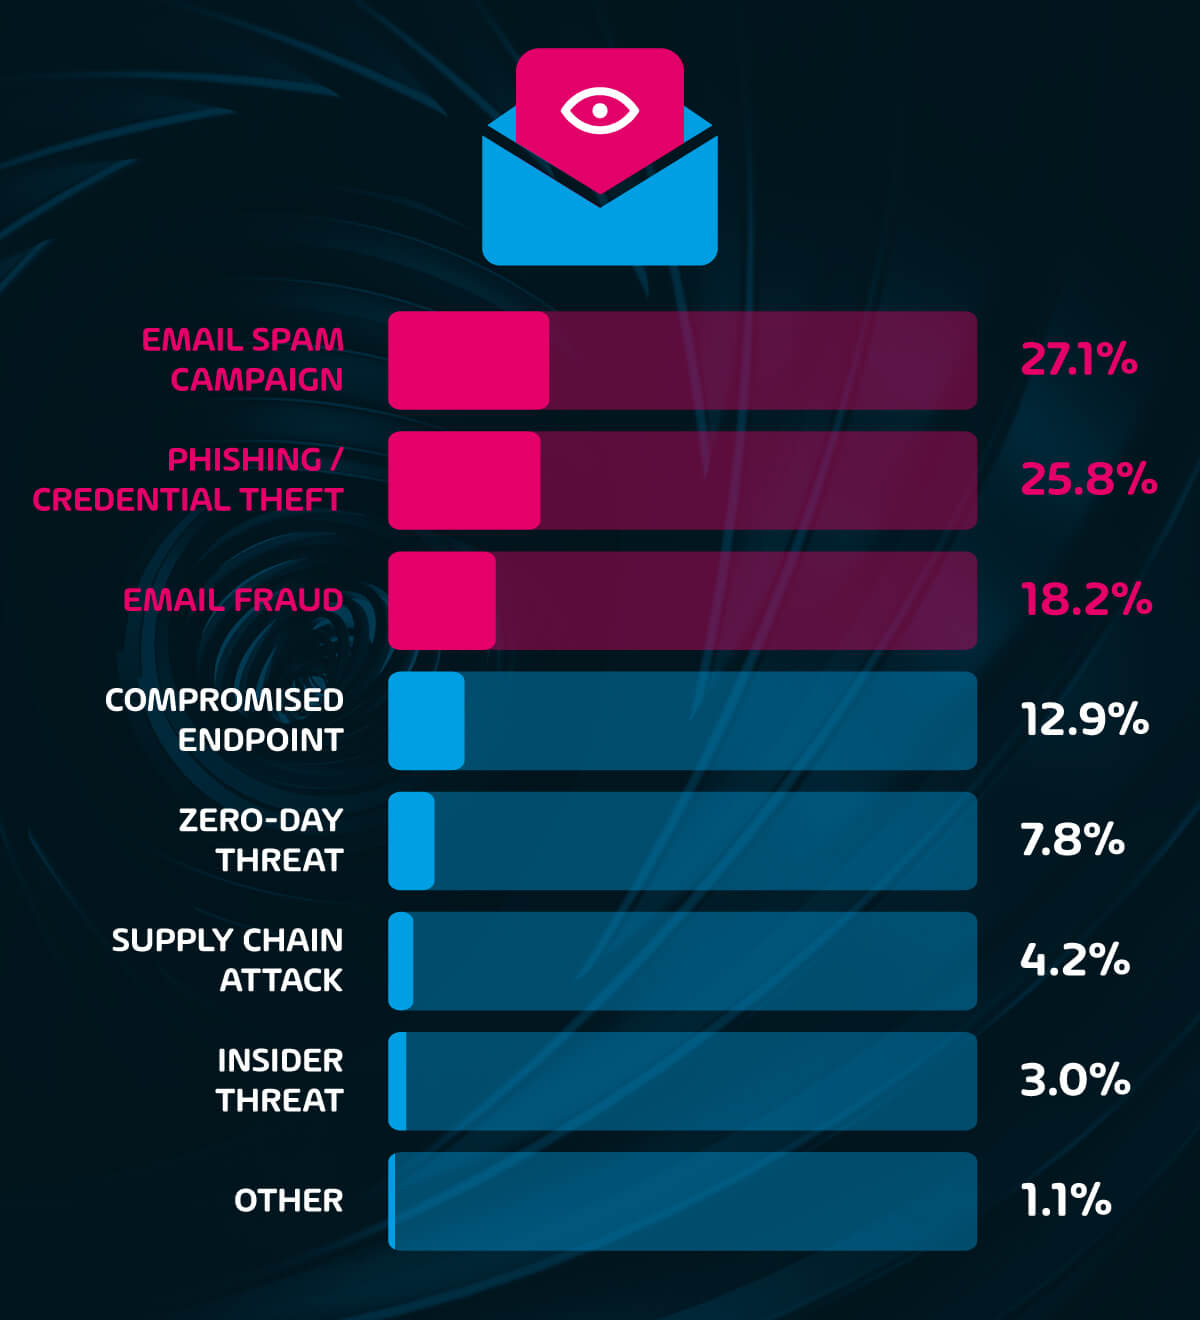 Attacks via email account for 71% of all reported incidents